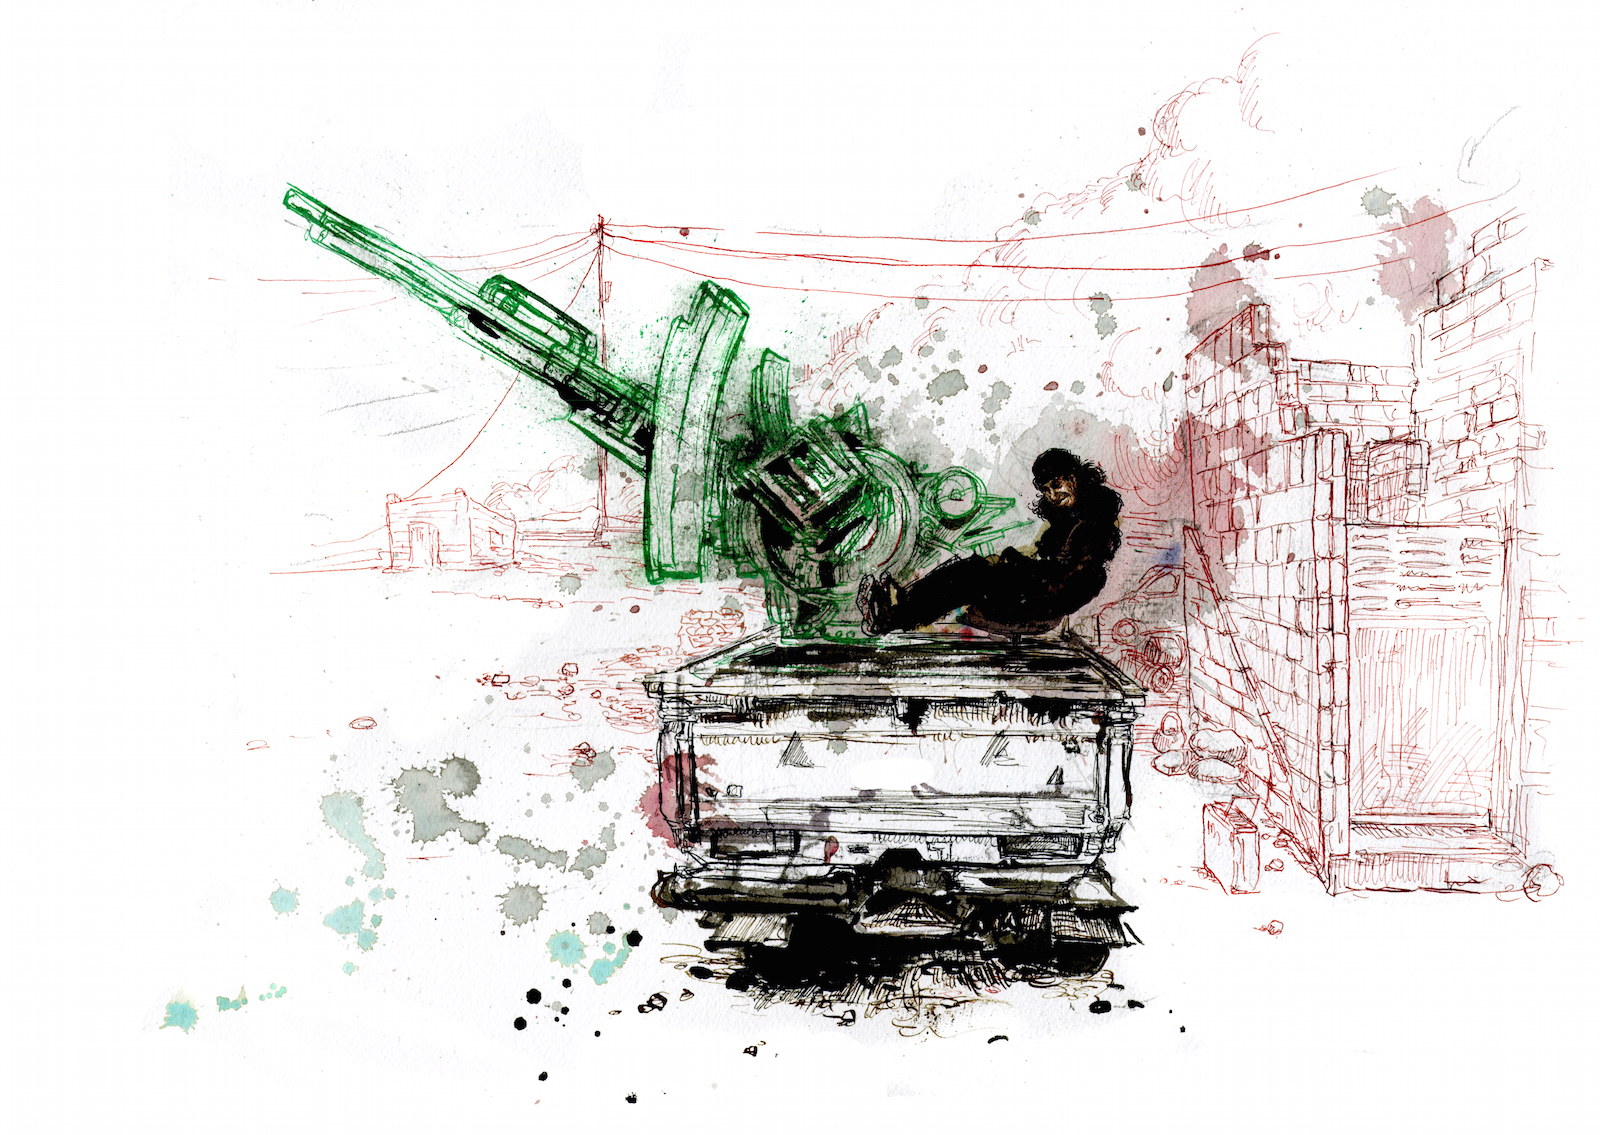 An ISIS fighter in repose in his Anti-Aircraft gun